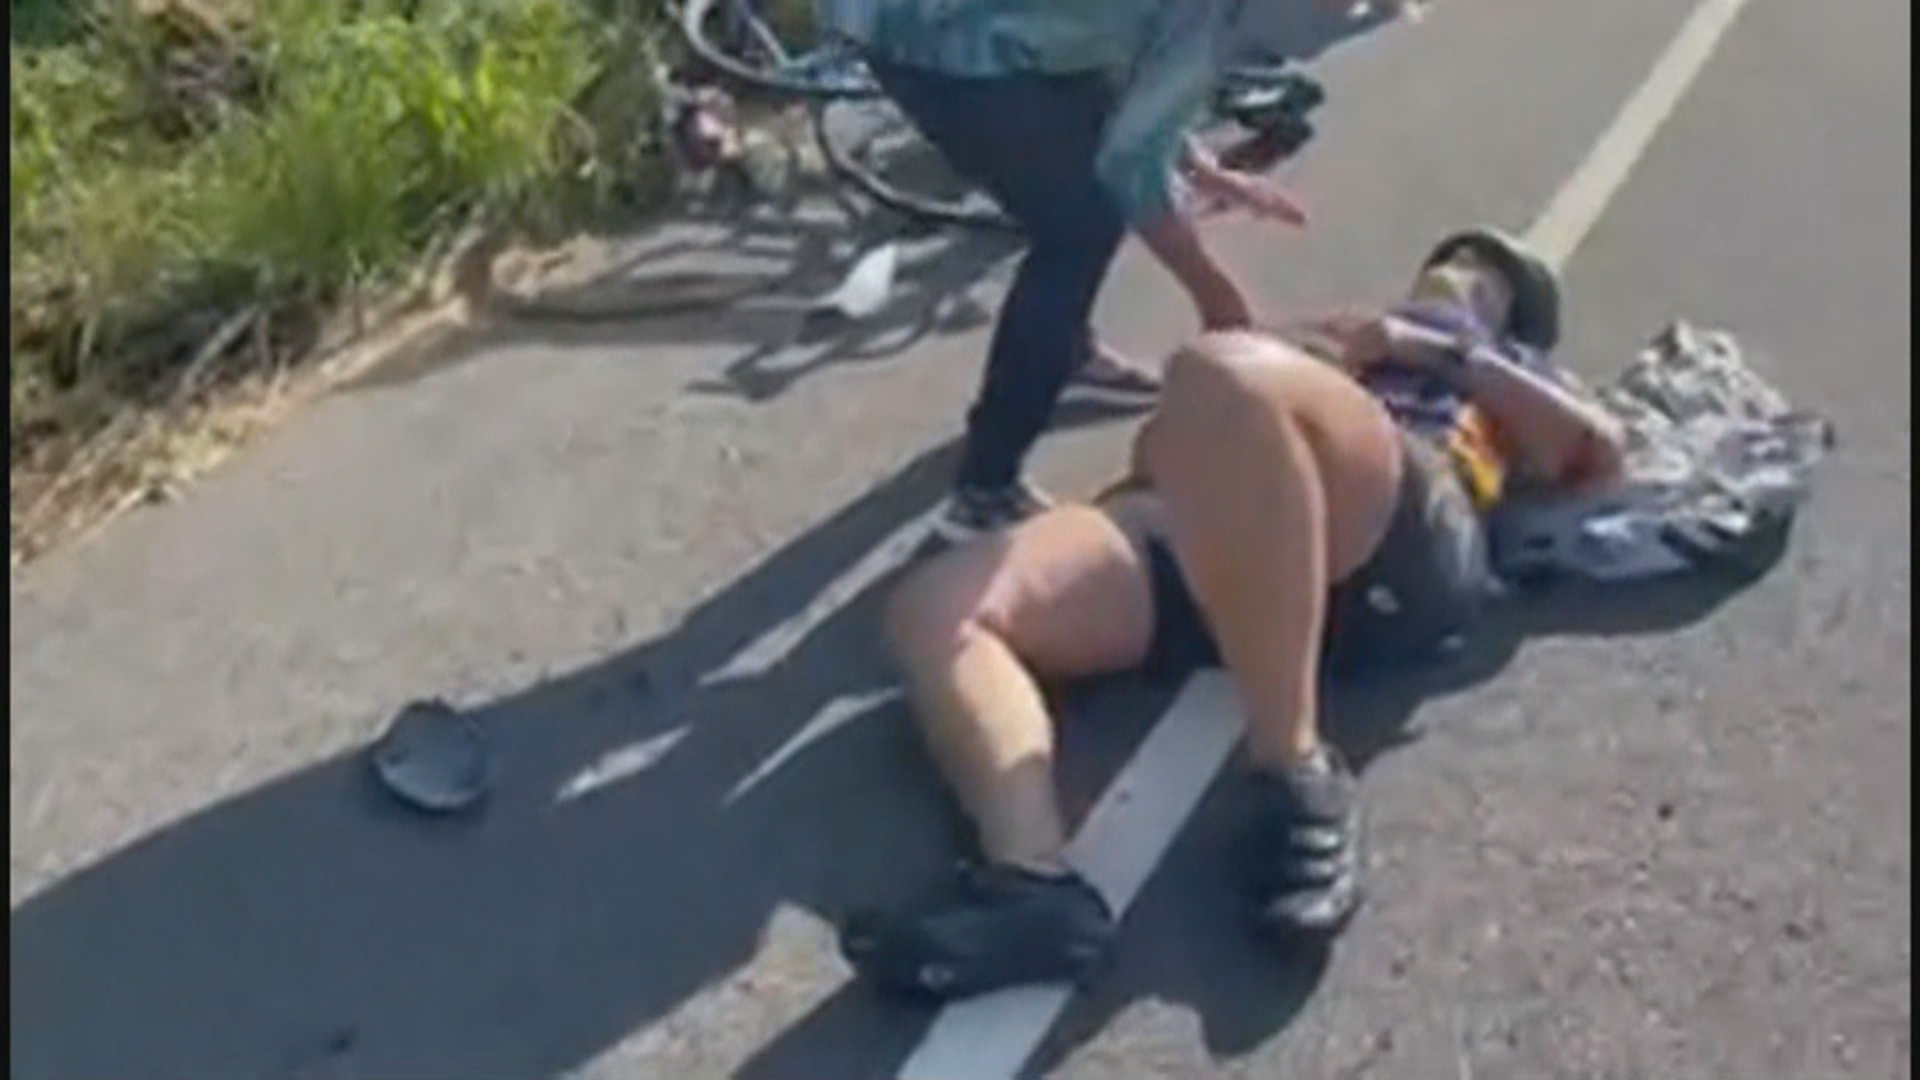 New Jersey Triathlon Club Pleas To Keep Cyclists Safe After 2 Cyclists Got Hit By Cars Over Past 2 Weeks